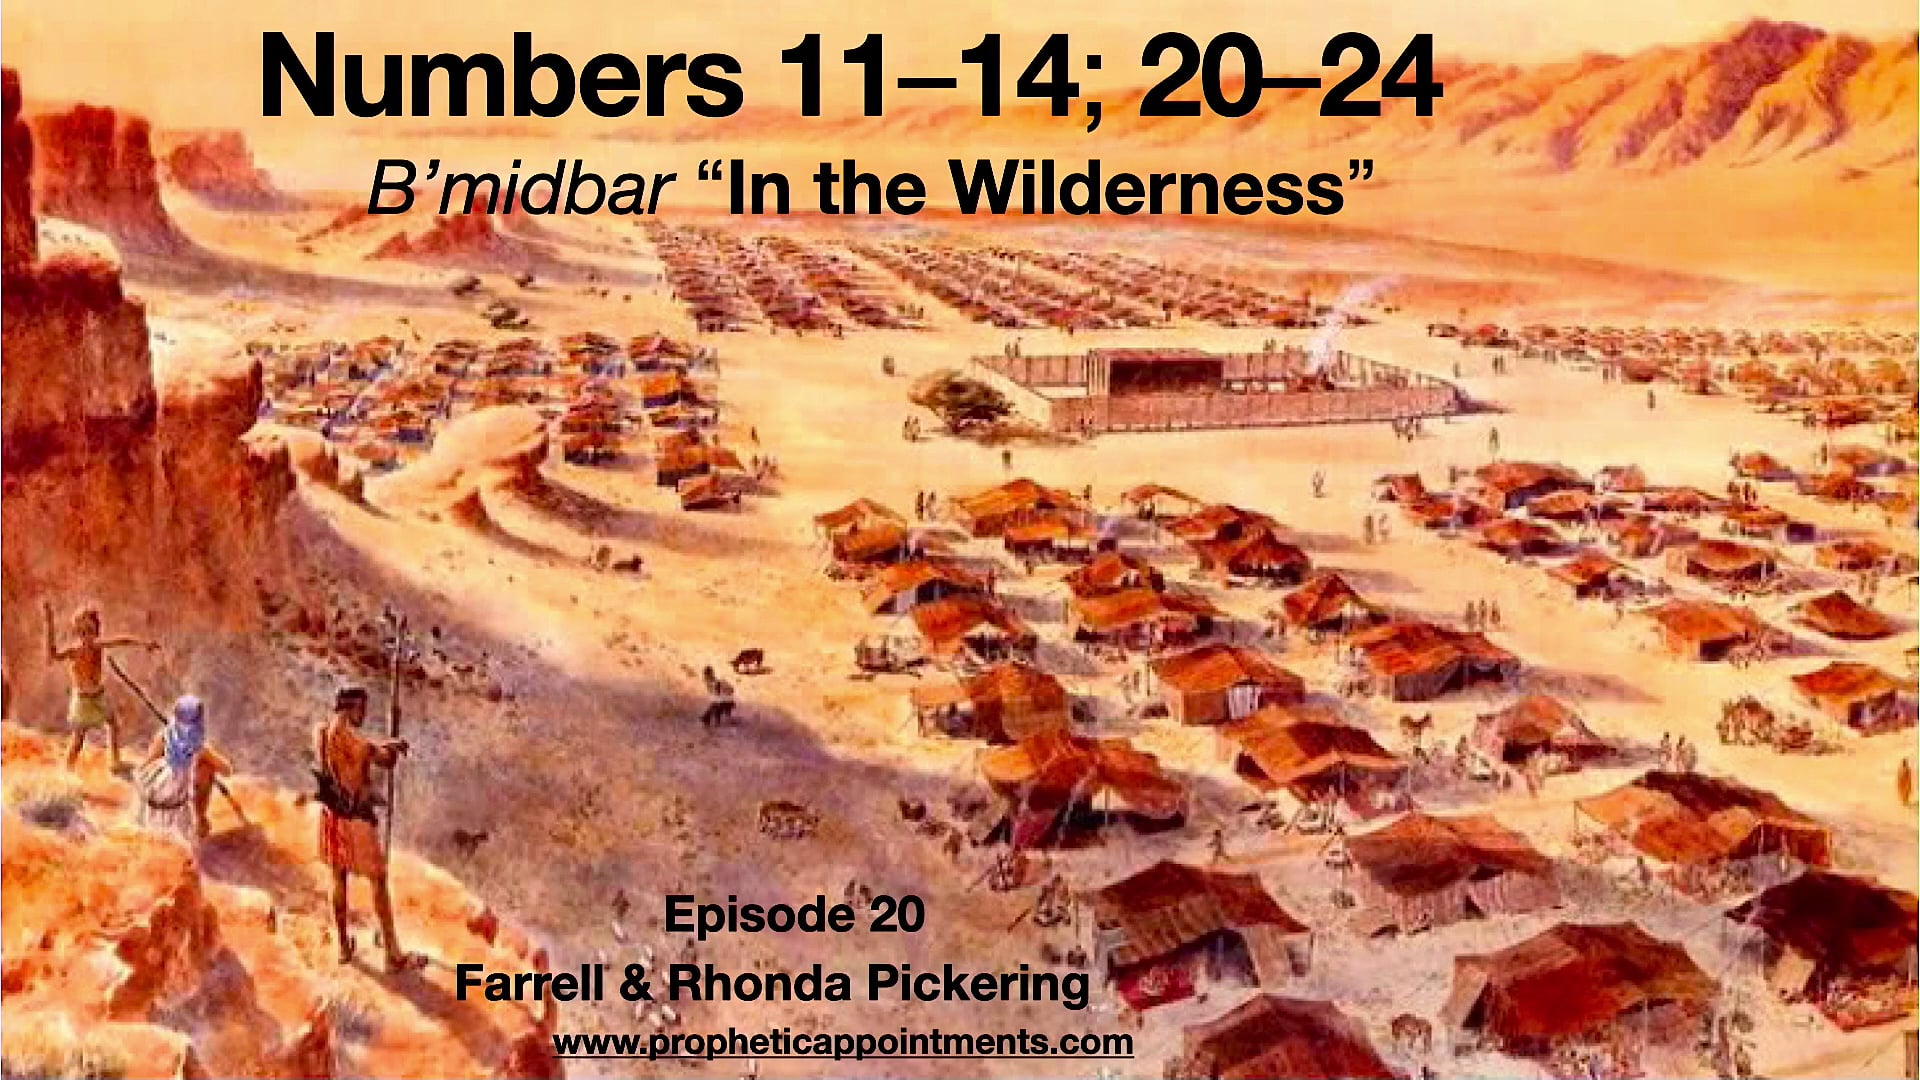 EP 20 Numbers 11-14, 20-24 Come Follow Me 2022 Farrell & Rhonda Pickering "Profound Stories in the Wilderness"